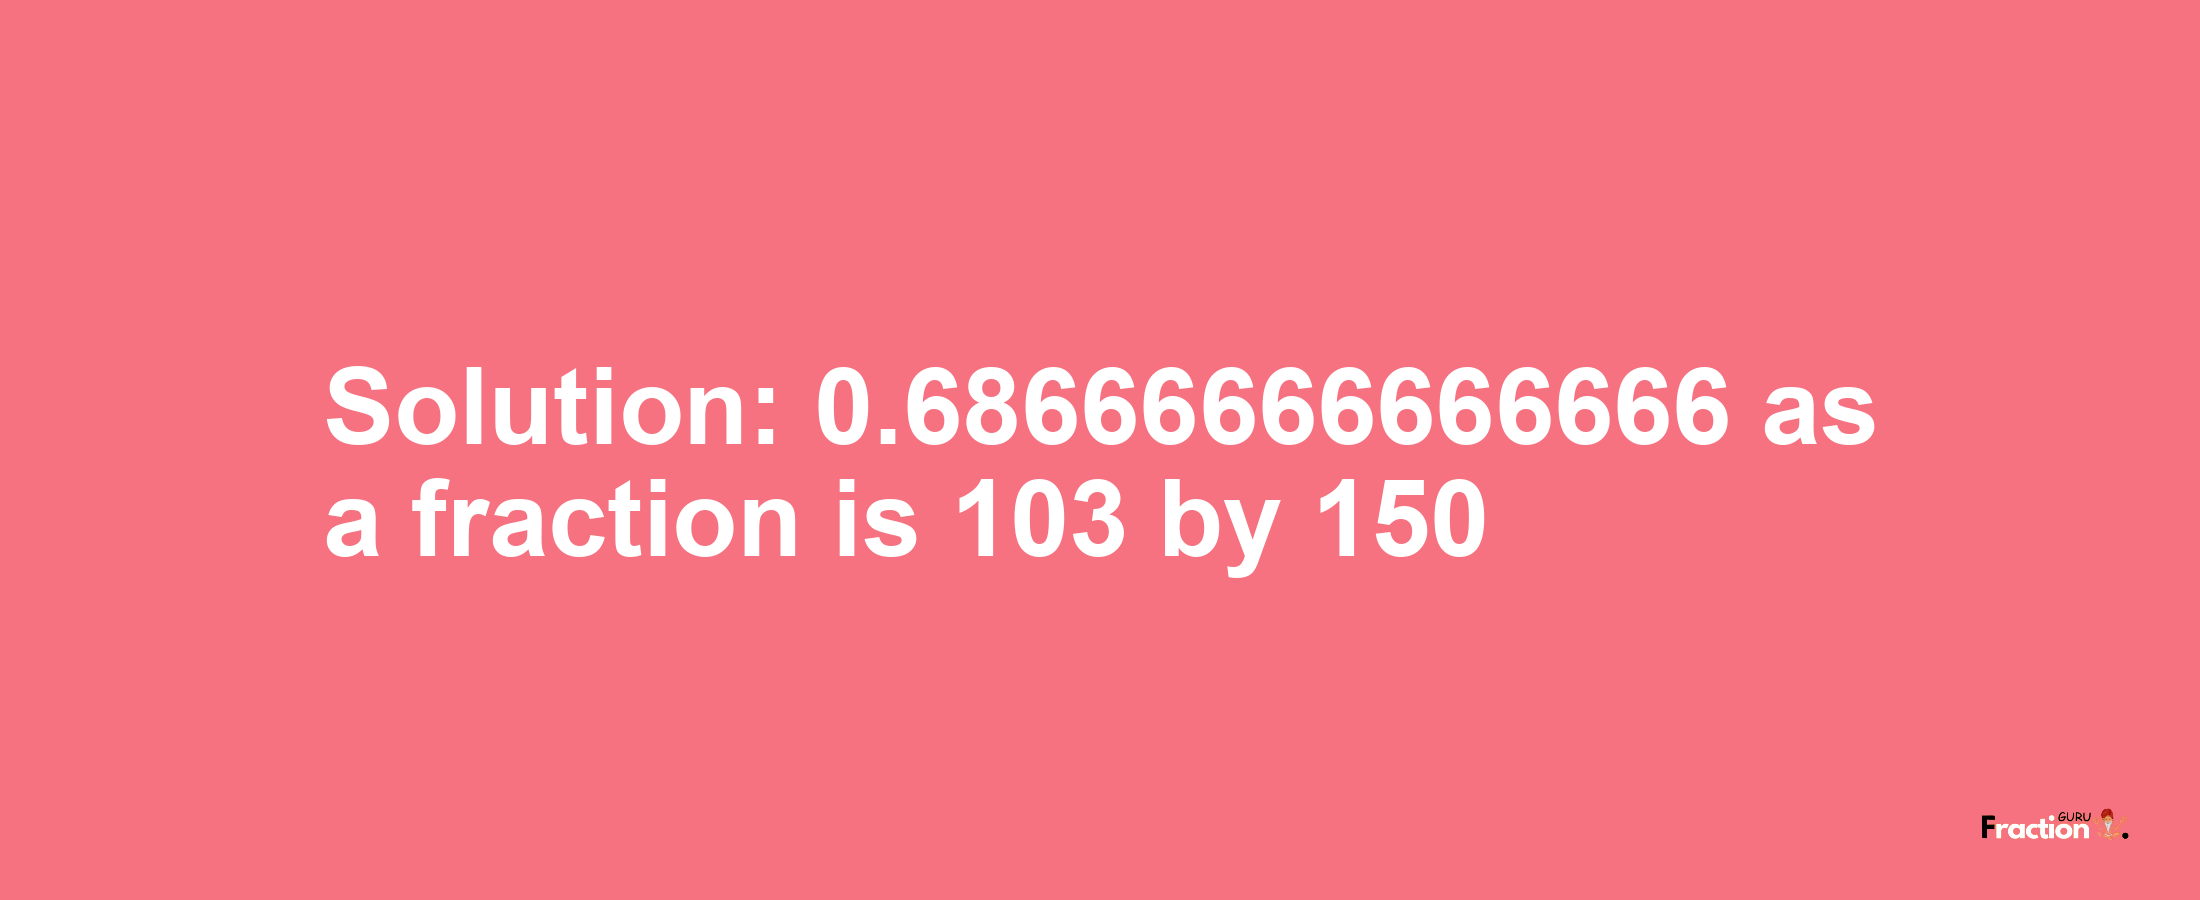 Solution:0.68666666666666 as a fraction is 103/150